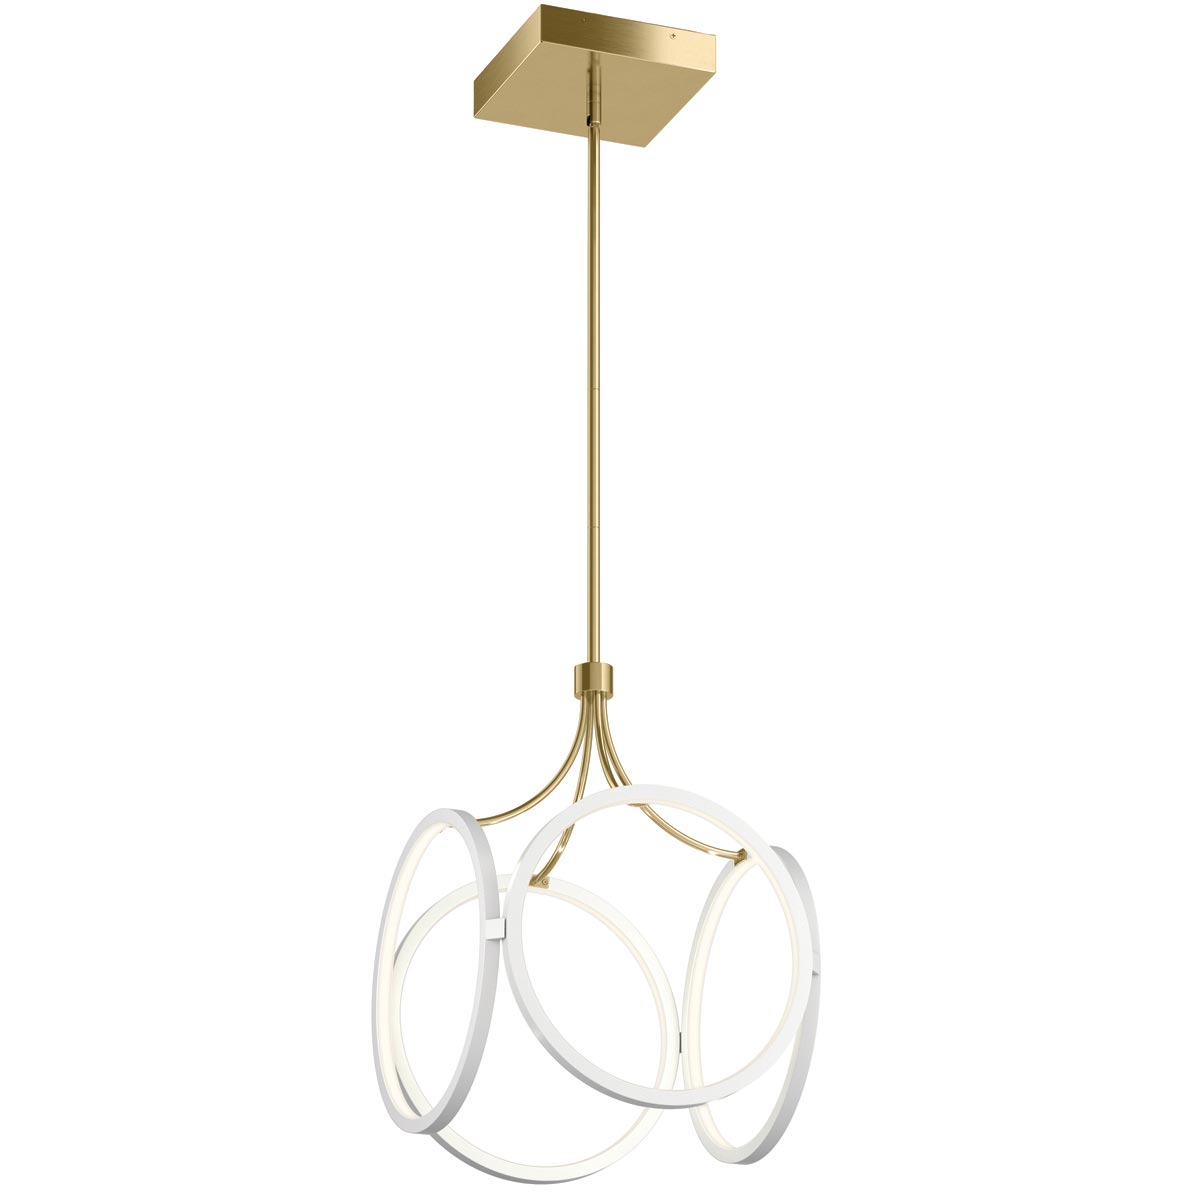 Quintiesse Ciri Dimming LED Ceiling Pendant White / Gold 2740lm